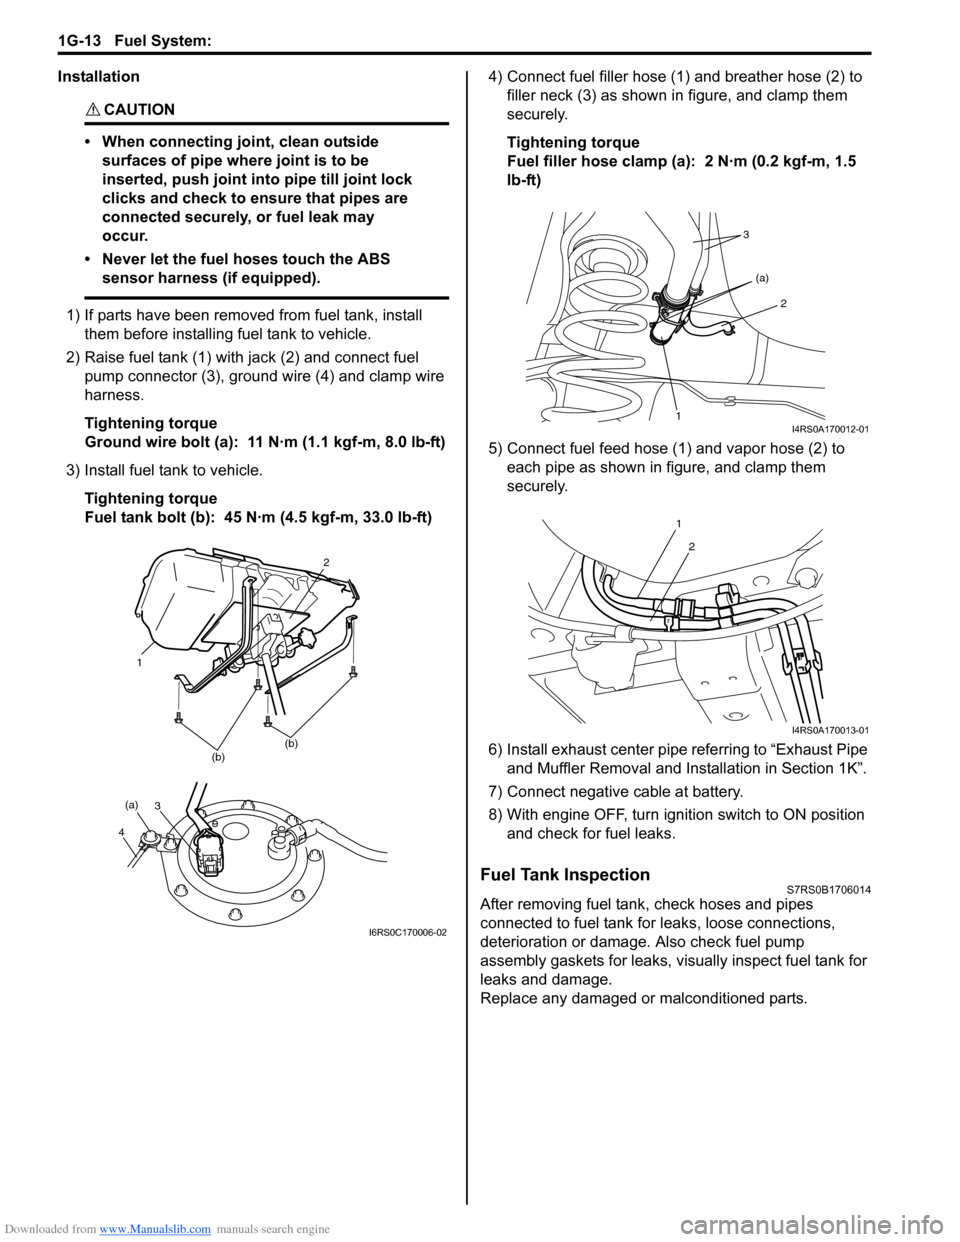 SUZUKI SWIFT 2006 2.G Service Workshop Manual Downloaded from www.Manualslib.com manuals search engine 1G-13 Fuel System: 
Installation
CAUTION! 
• When connecting joint, clean outside surfaces of pipe where joint is to be 
inserted, push joint